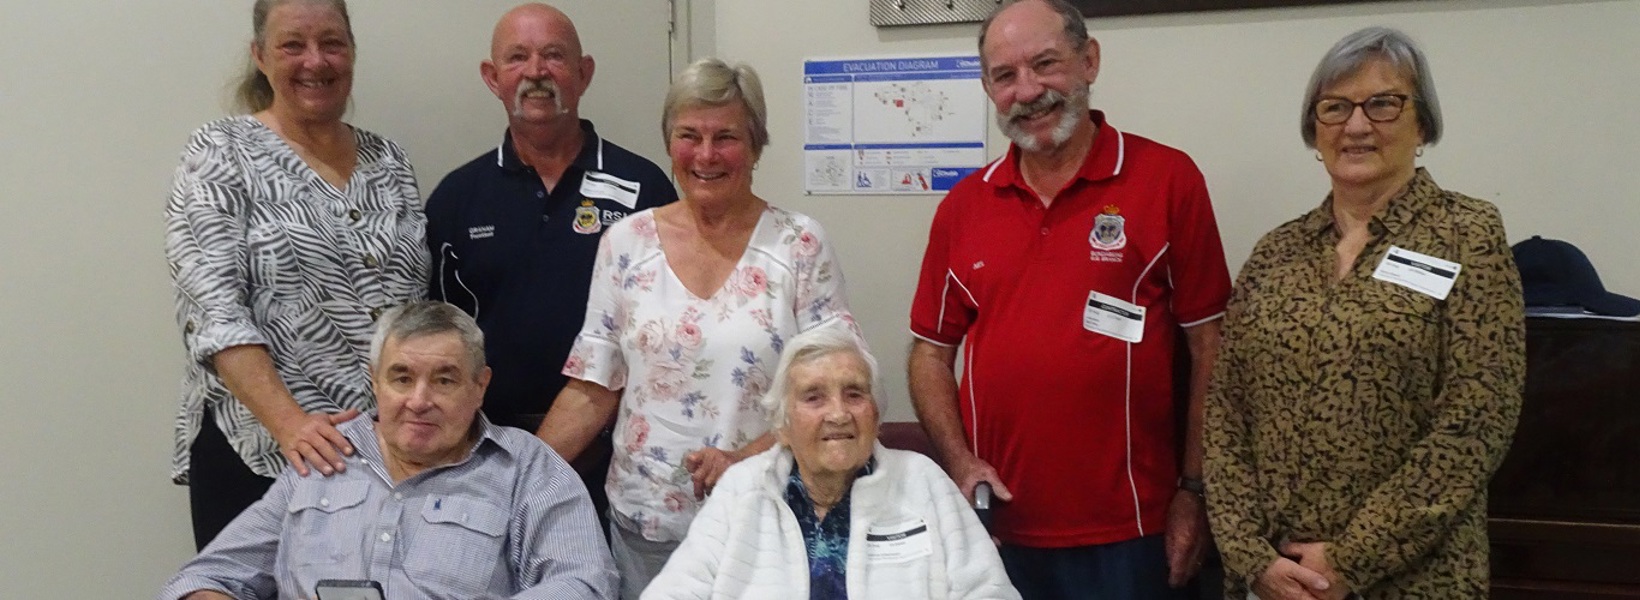 Fairways resident Greg and family with Bundaberg RSL Sub Branch Members Graham and Neil